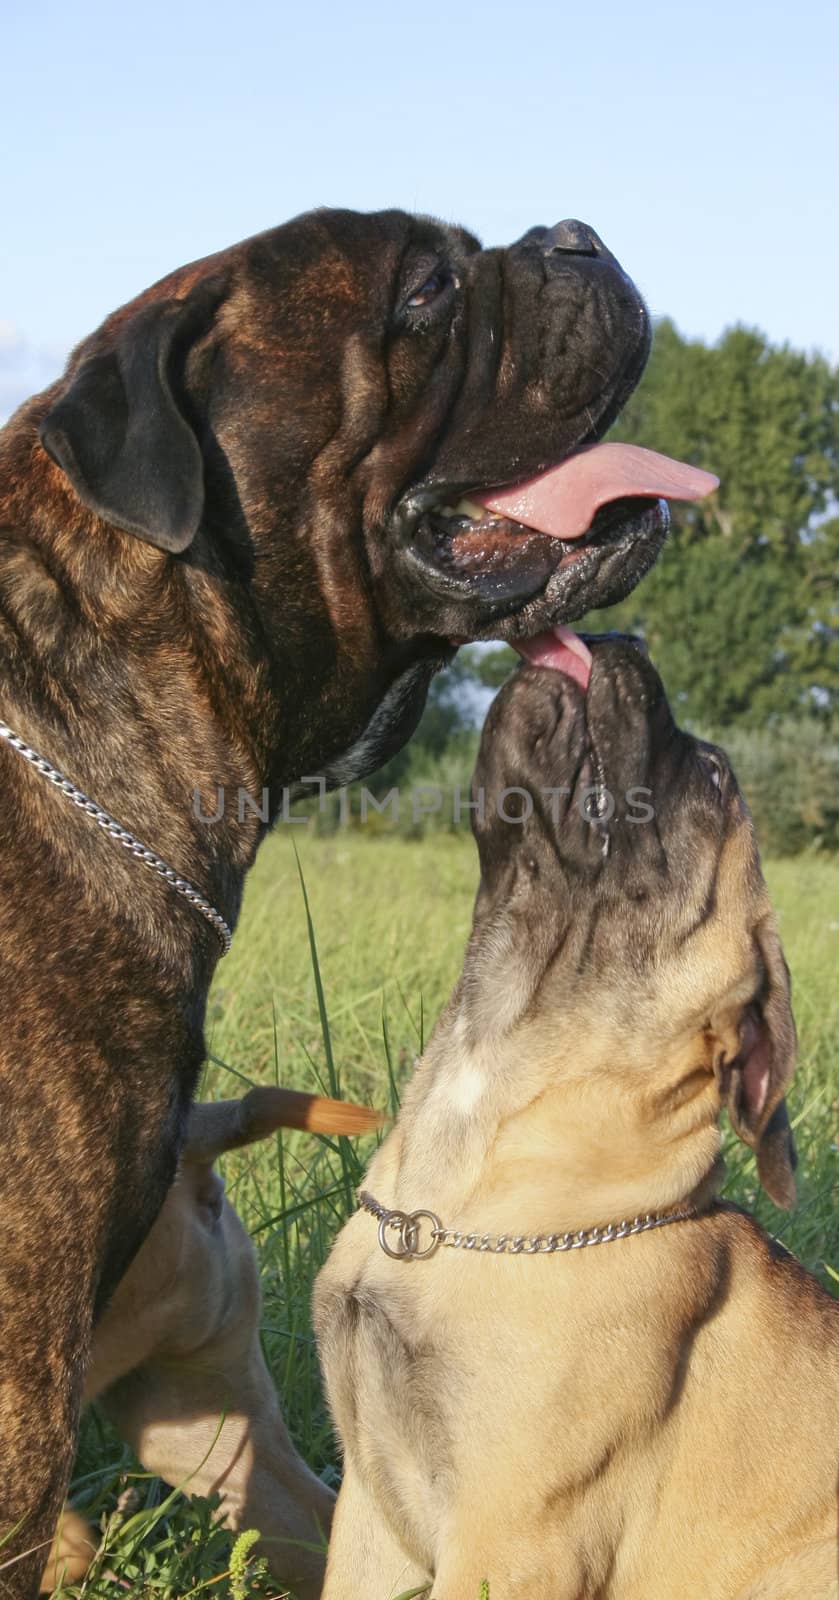 A bullmastiff puppy and his mate.